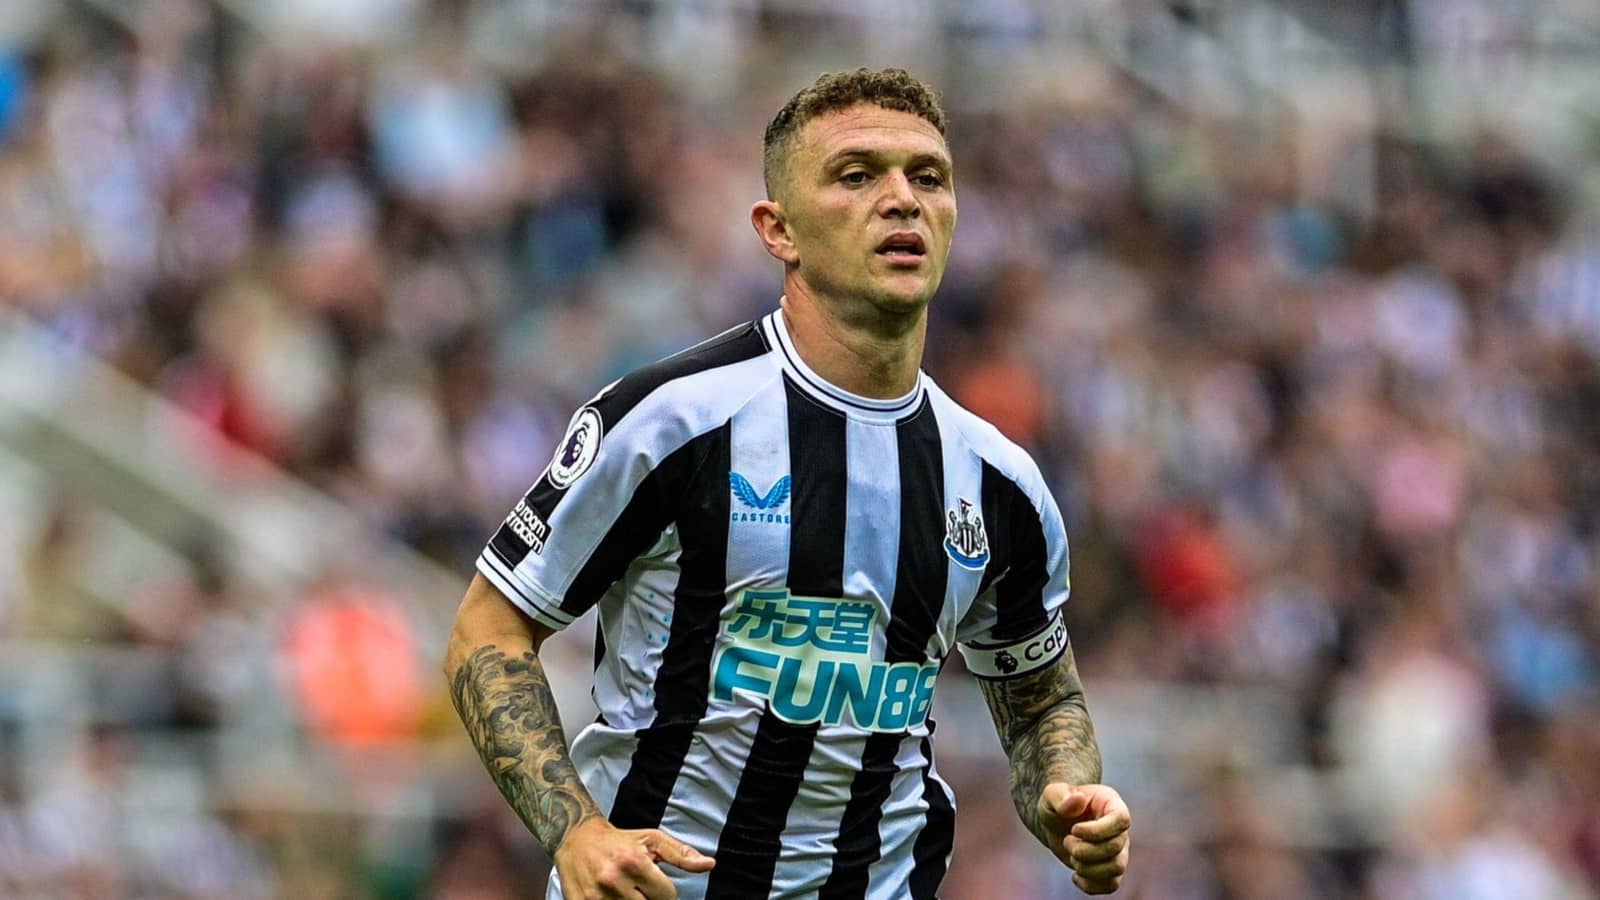 Newcastle defender Kieran Trippier confronts ’emotional’ fans after defeat and says ‘don’t panic’